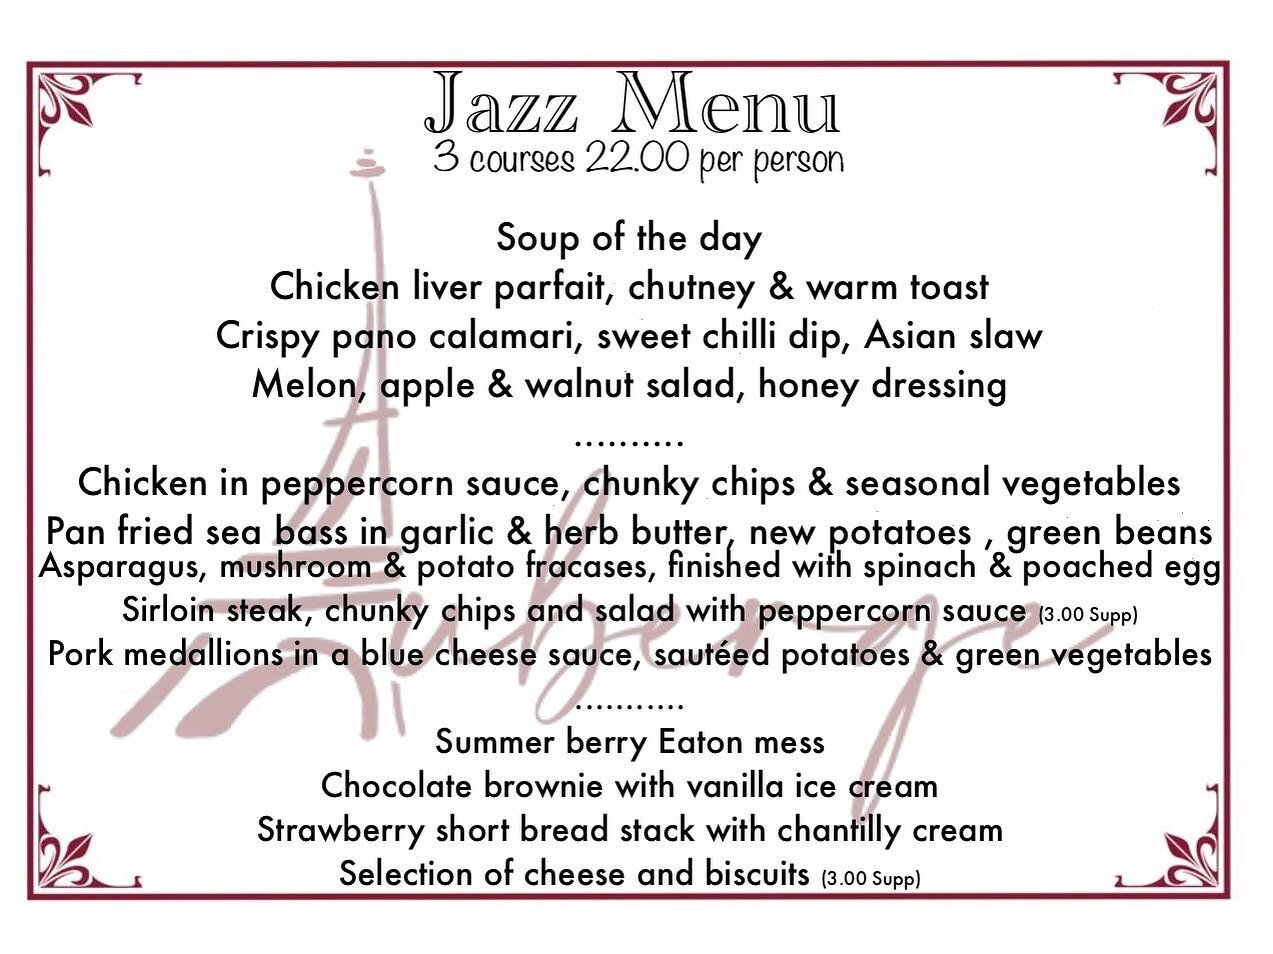 Monday night is jazz night @aubergesouthport to book please call the restaurant on 01704 530671 or email restaurant@aubergebrasserie.co.uk.  #jazz #newmenu #staylocal #goodfood #frenchbistro #love #music